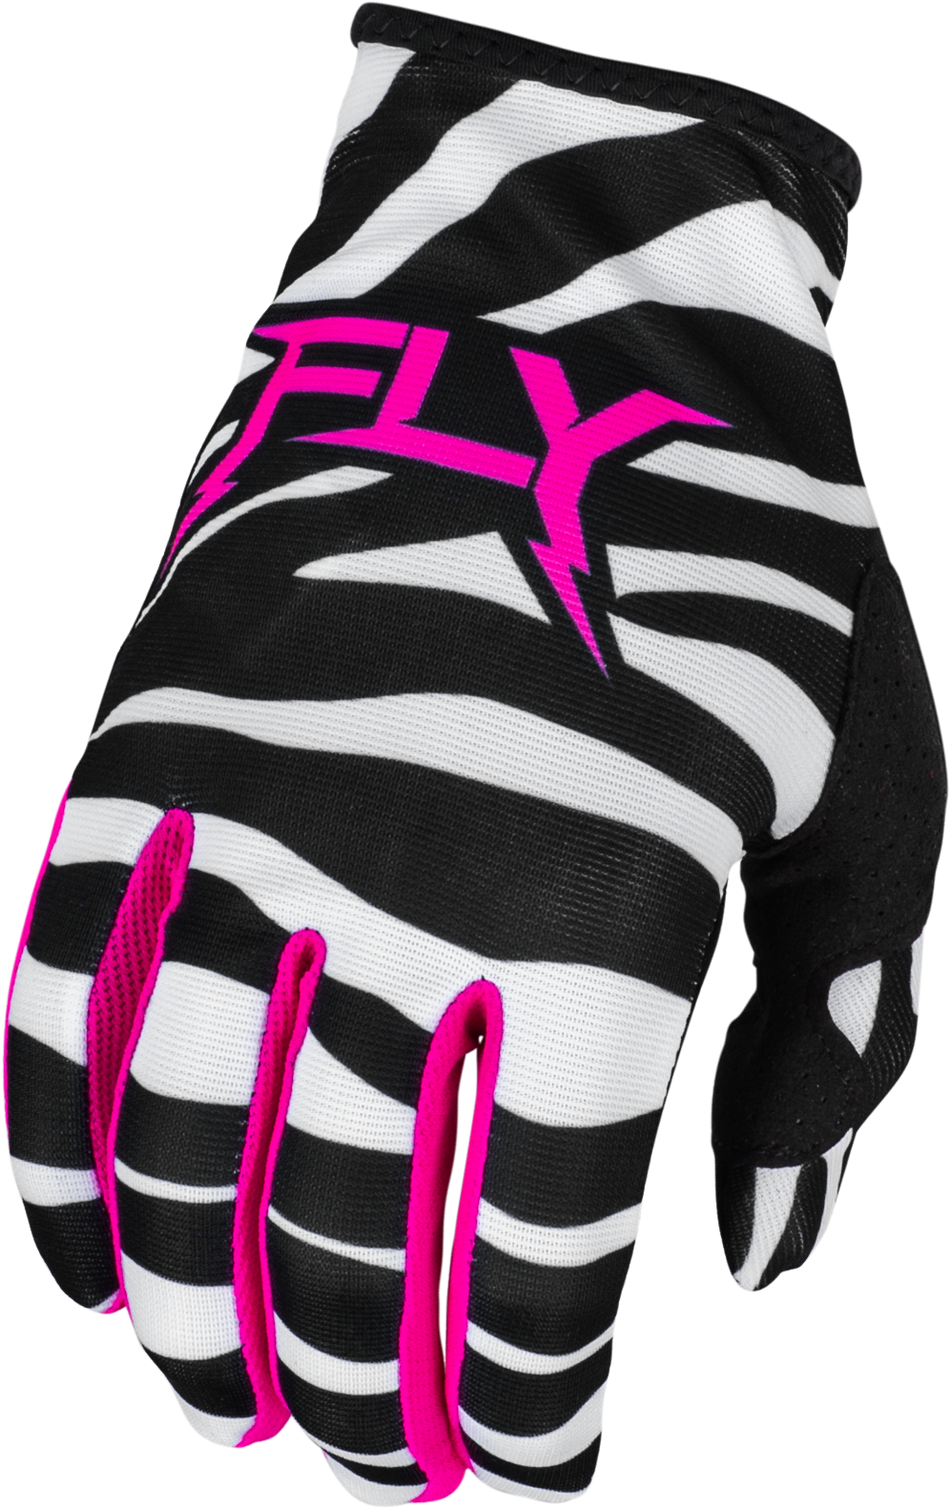 FLY RACING Lite Uncaged Gloves Black/White/Neon Pink Sm 377-741S